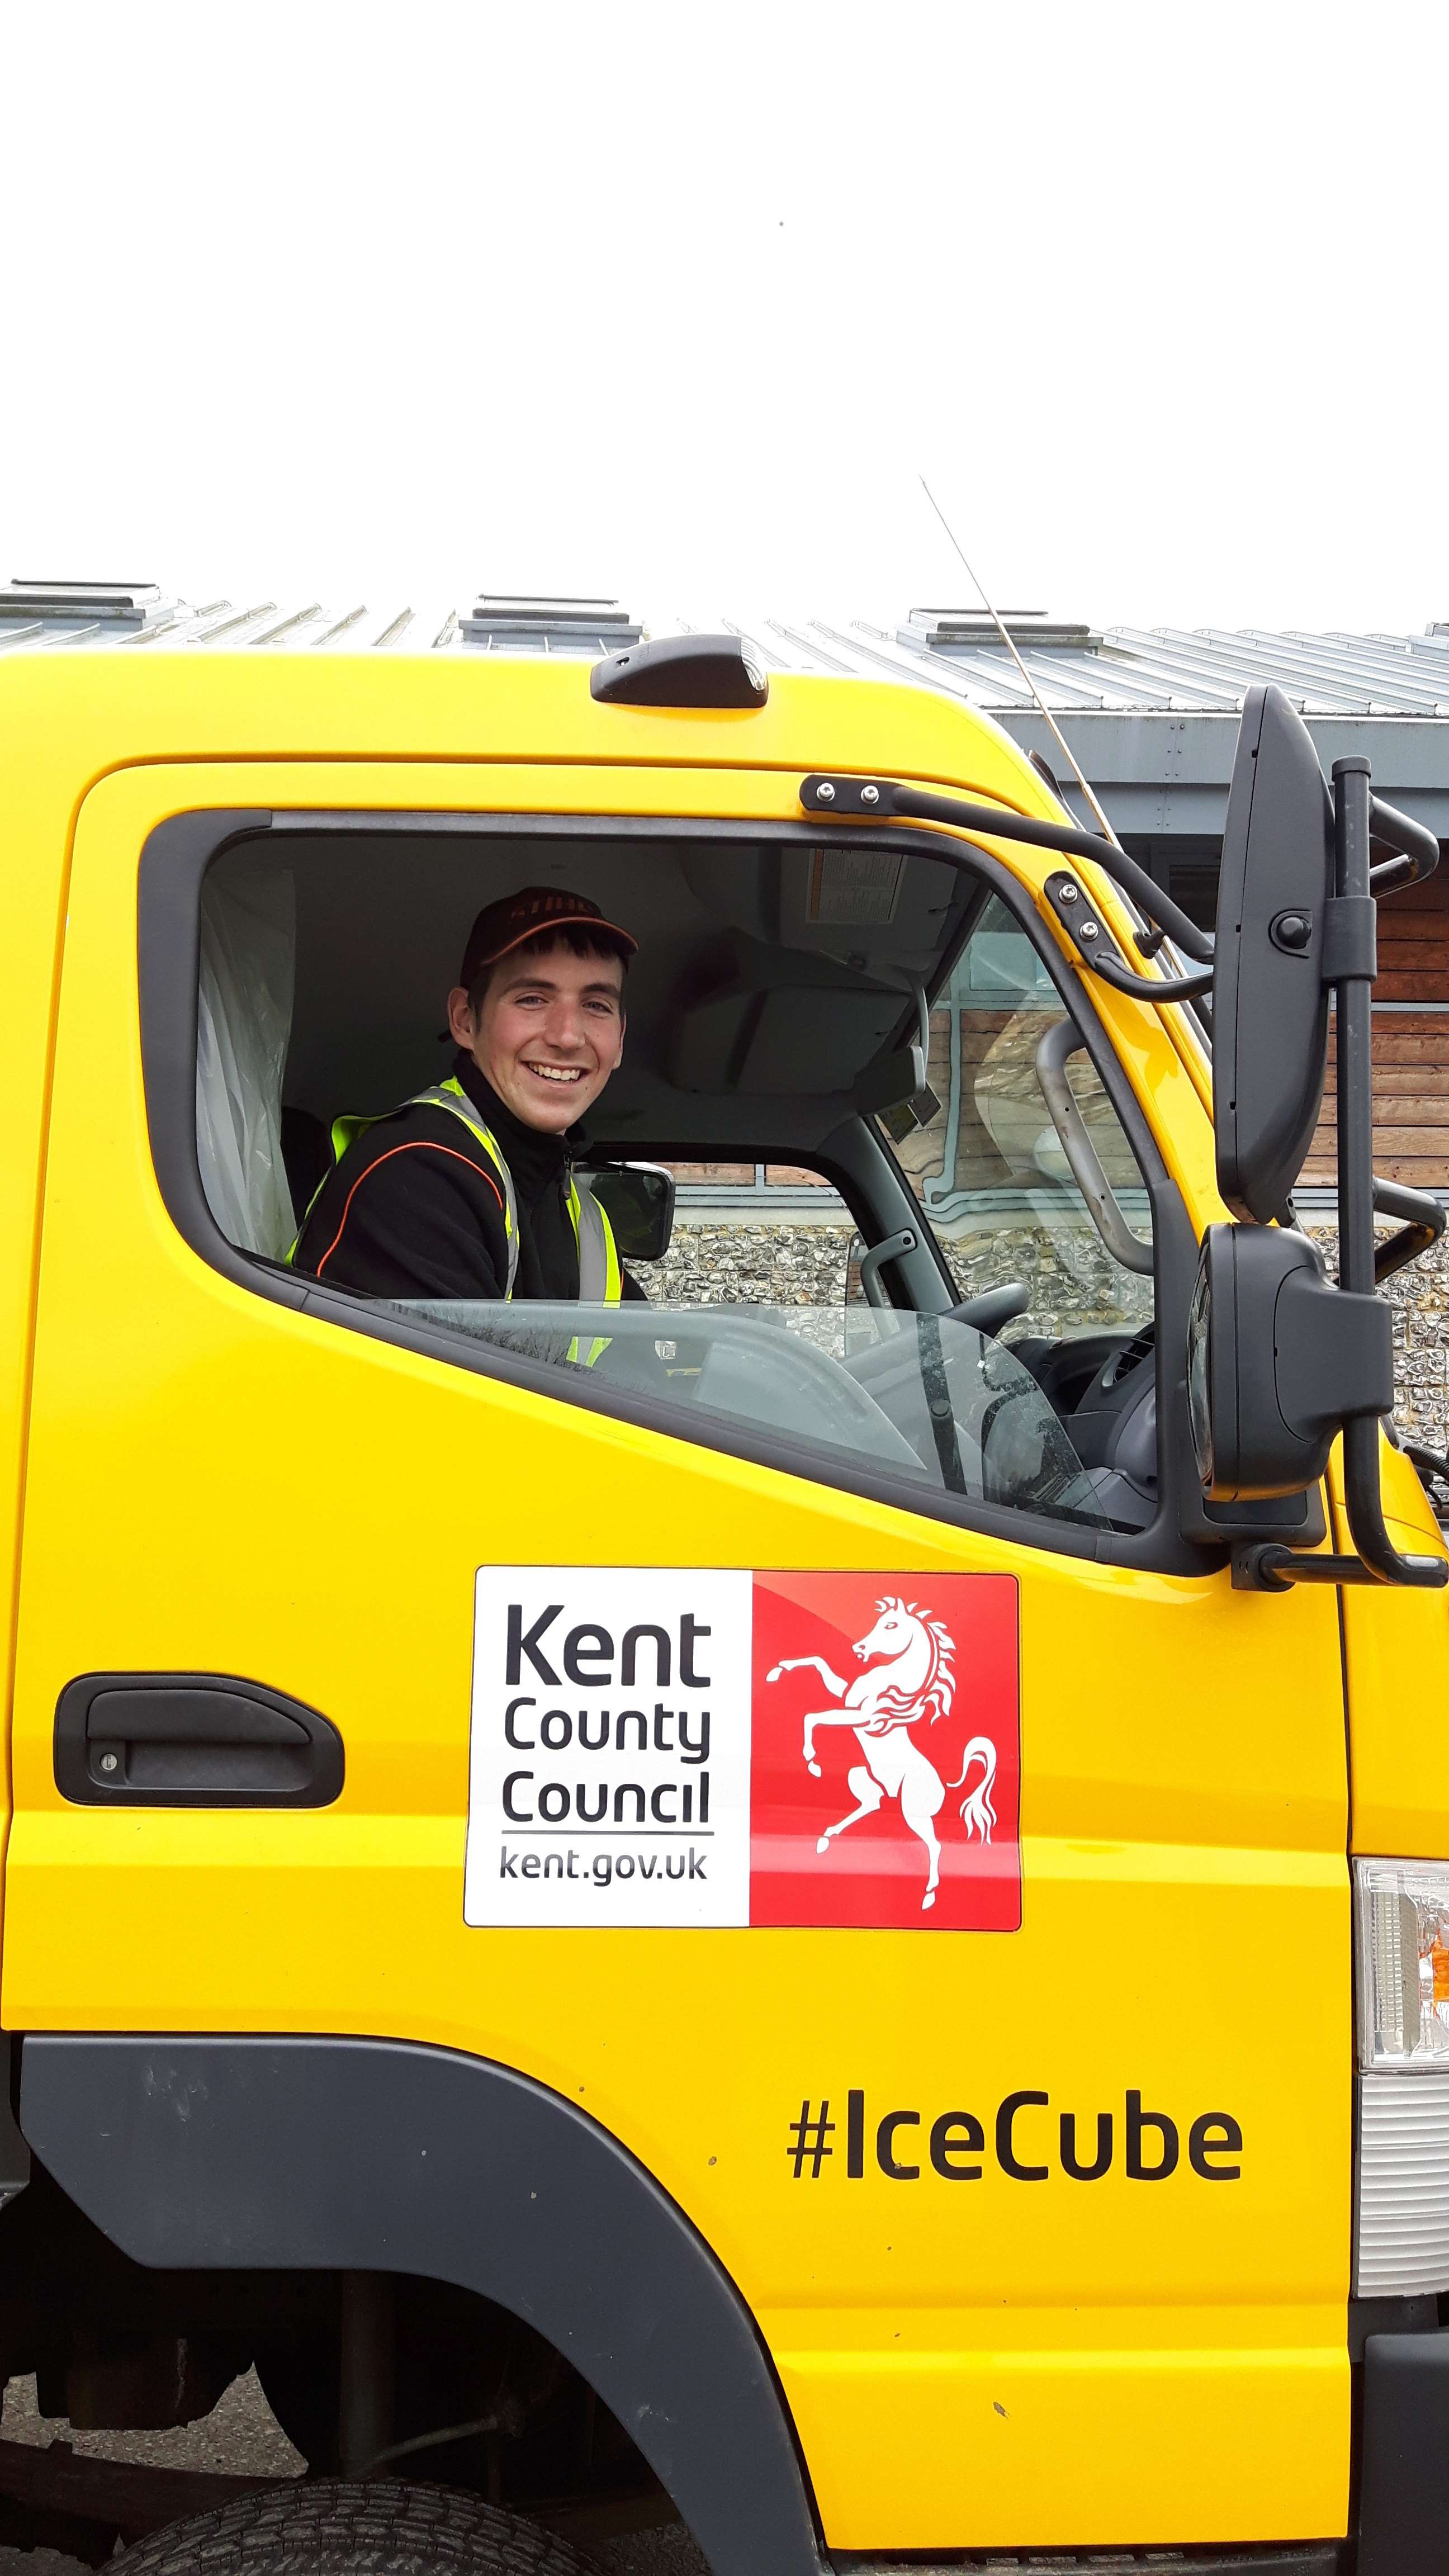 Paul Fagg in one of the KCC gritters